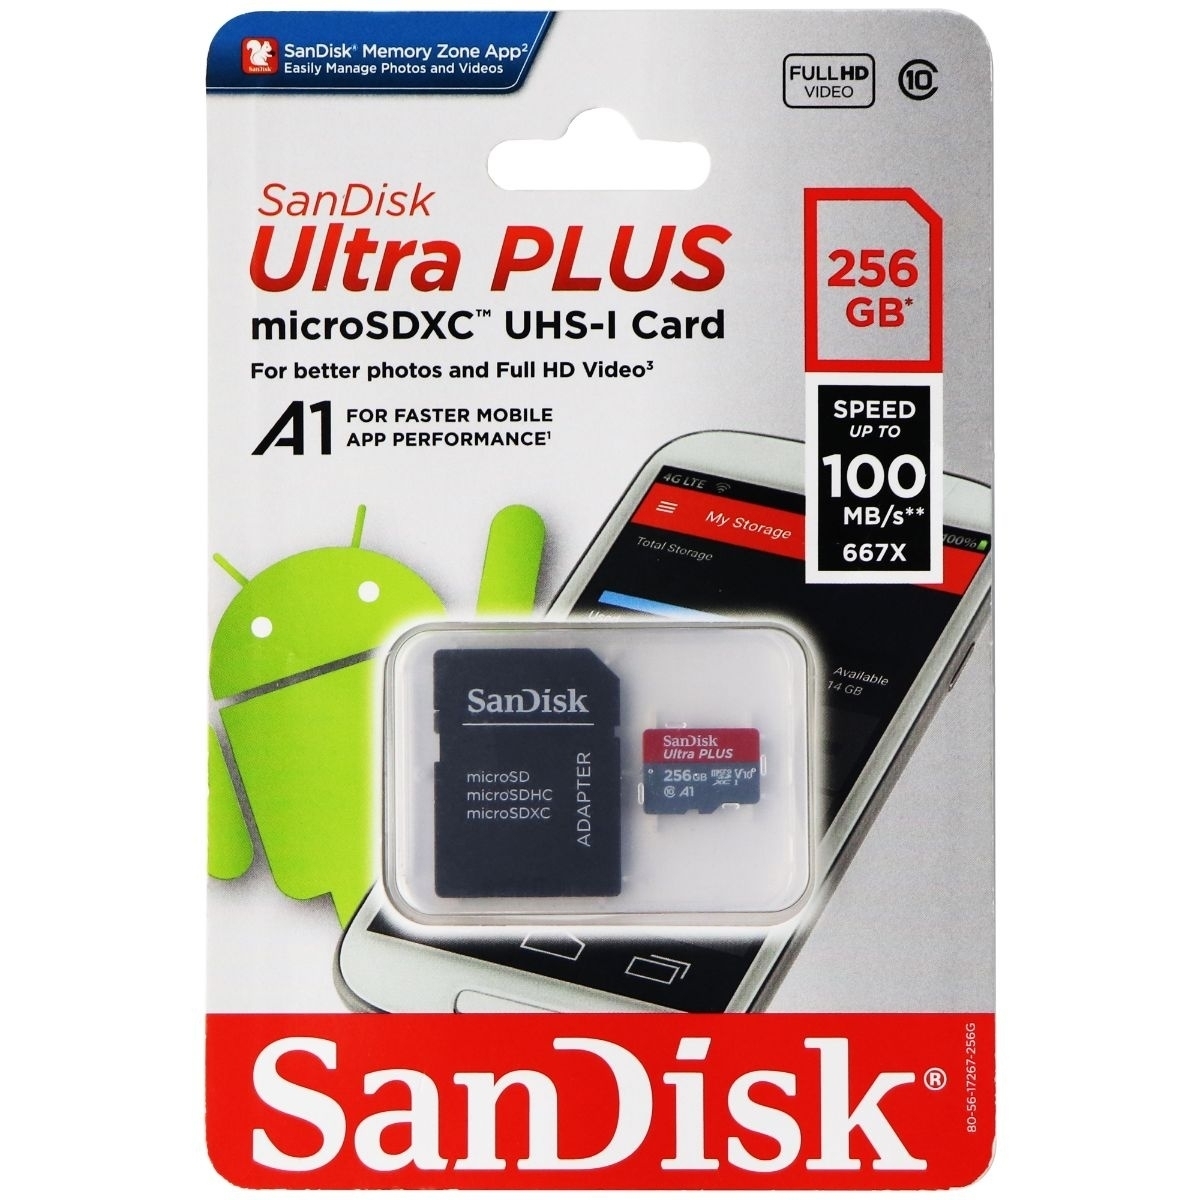 SanDisk Ultra Plus MicroSDXC UHS-1 Card With Adapter 256GB / 100MB/s